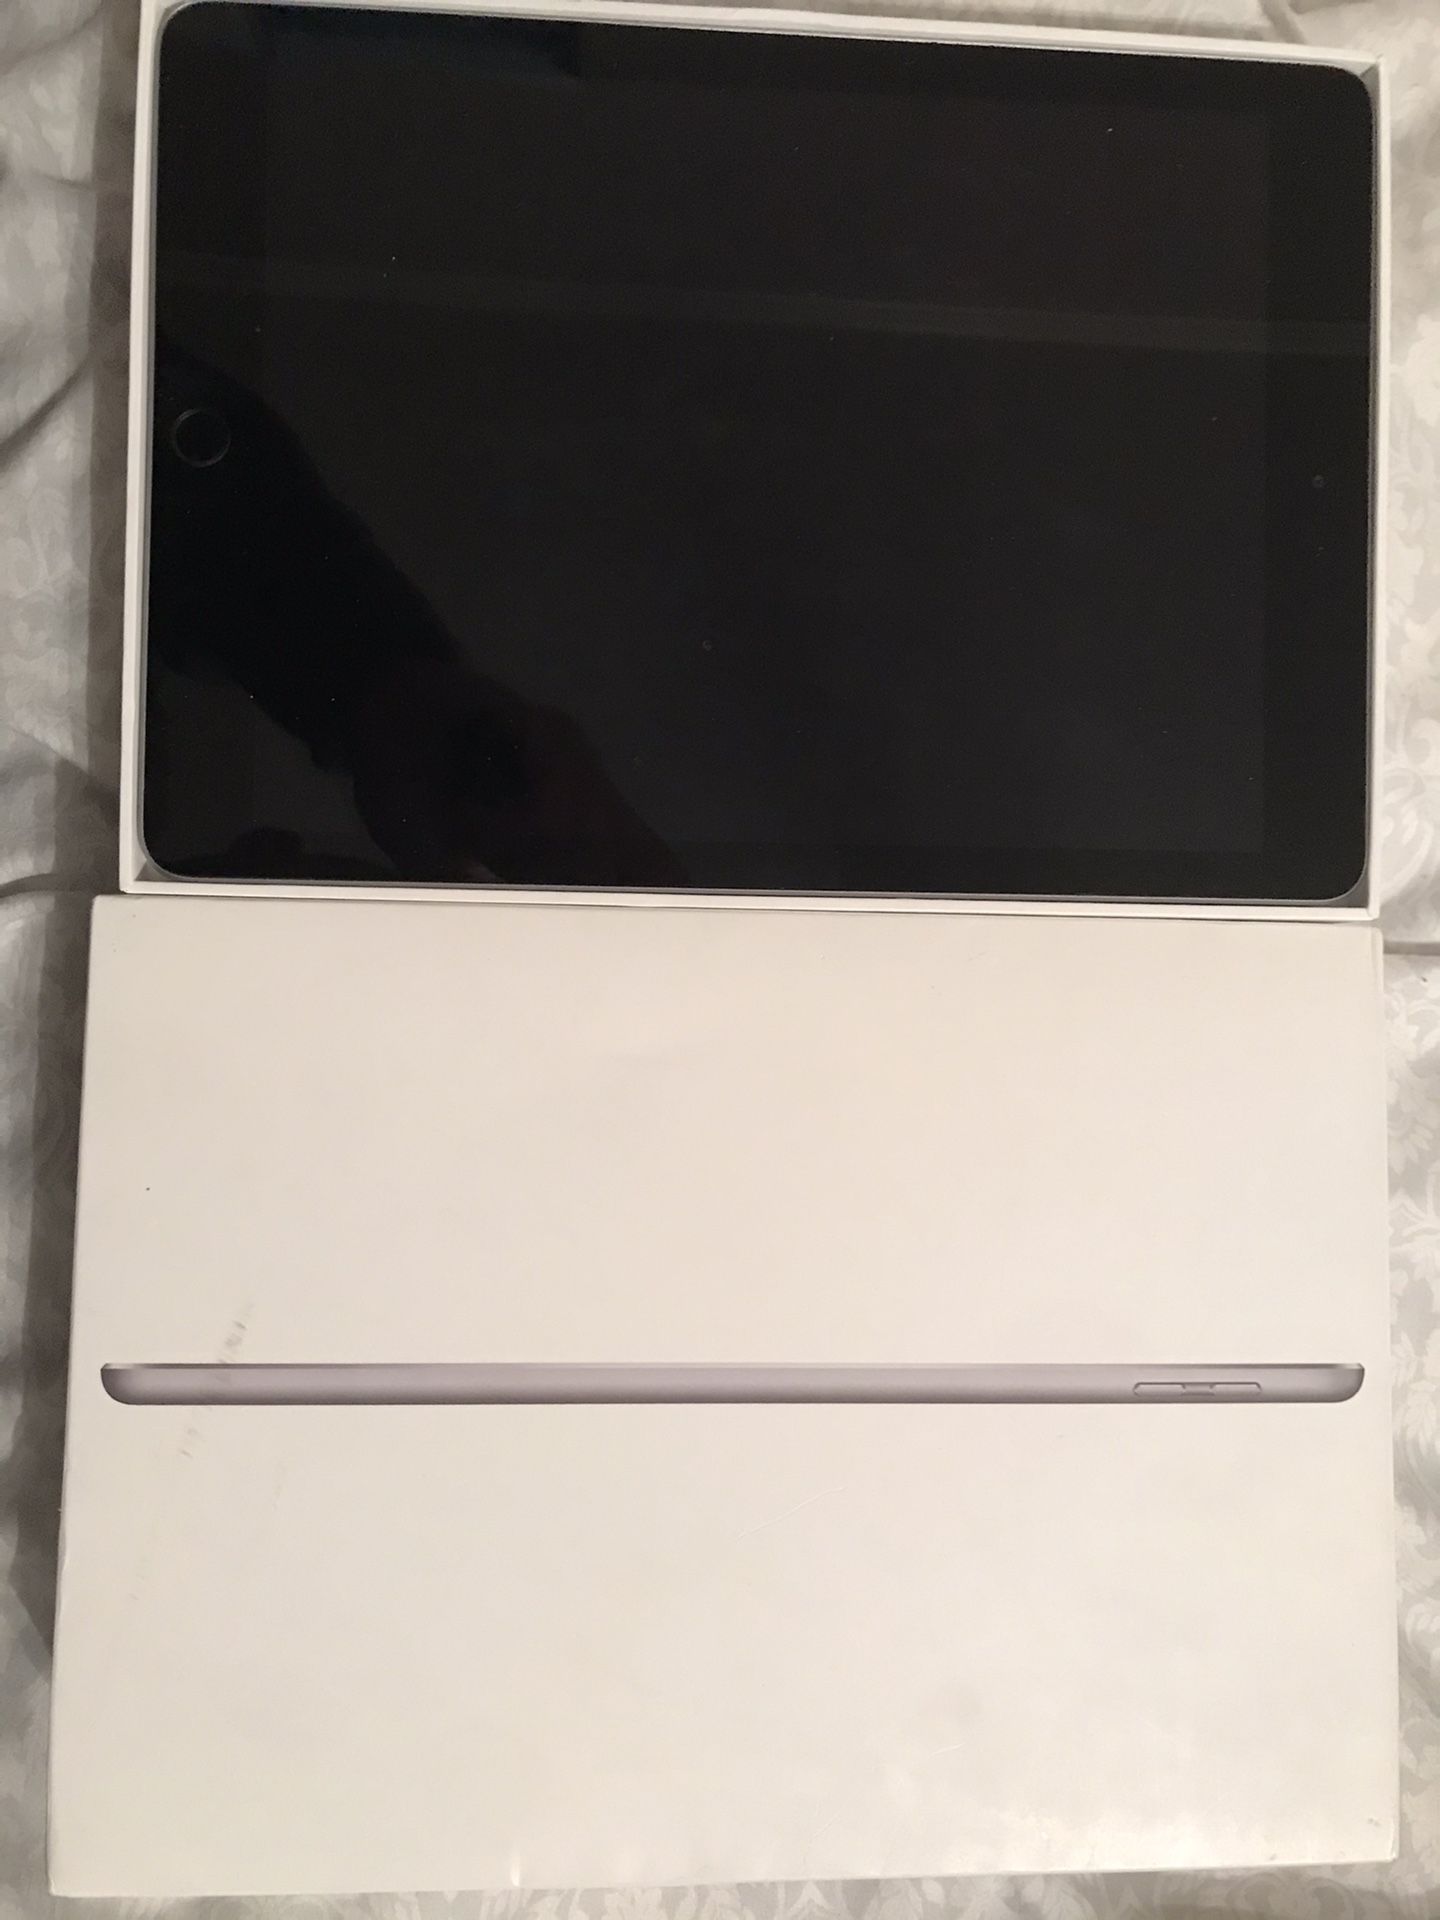 iPad 6th generation 32 gig color/space gray/wi-if only